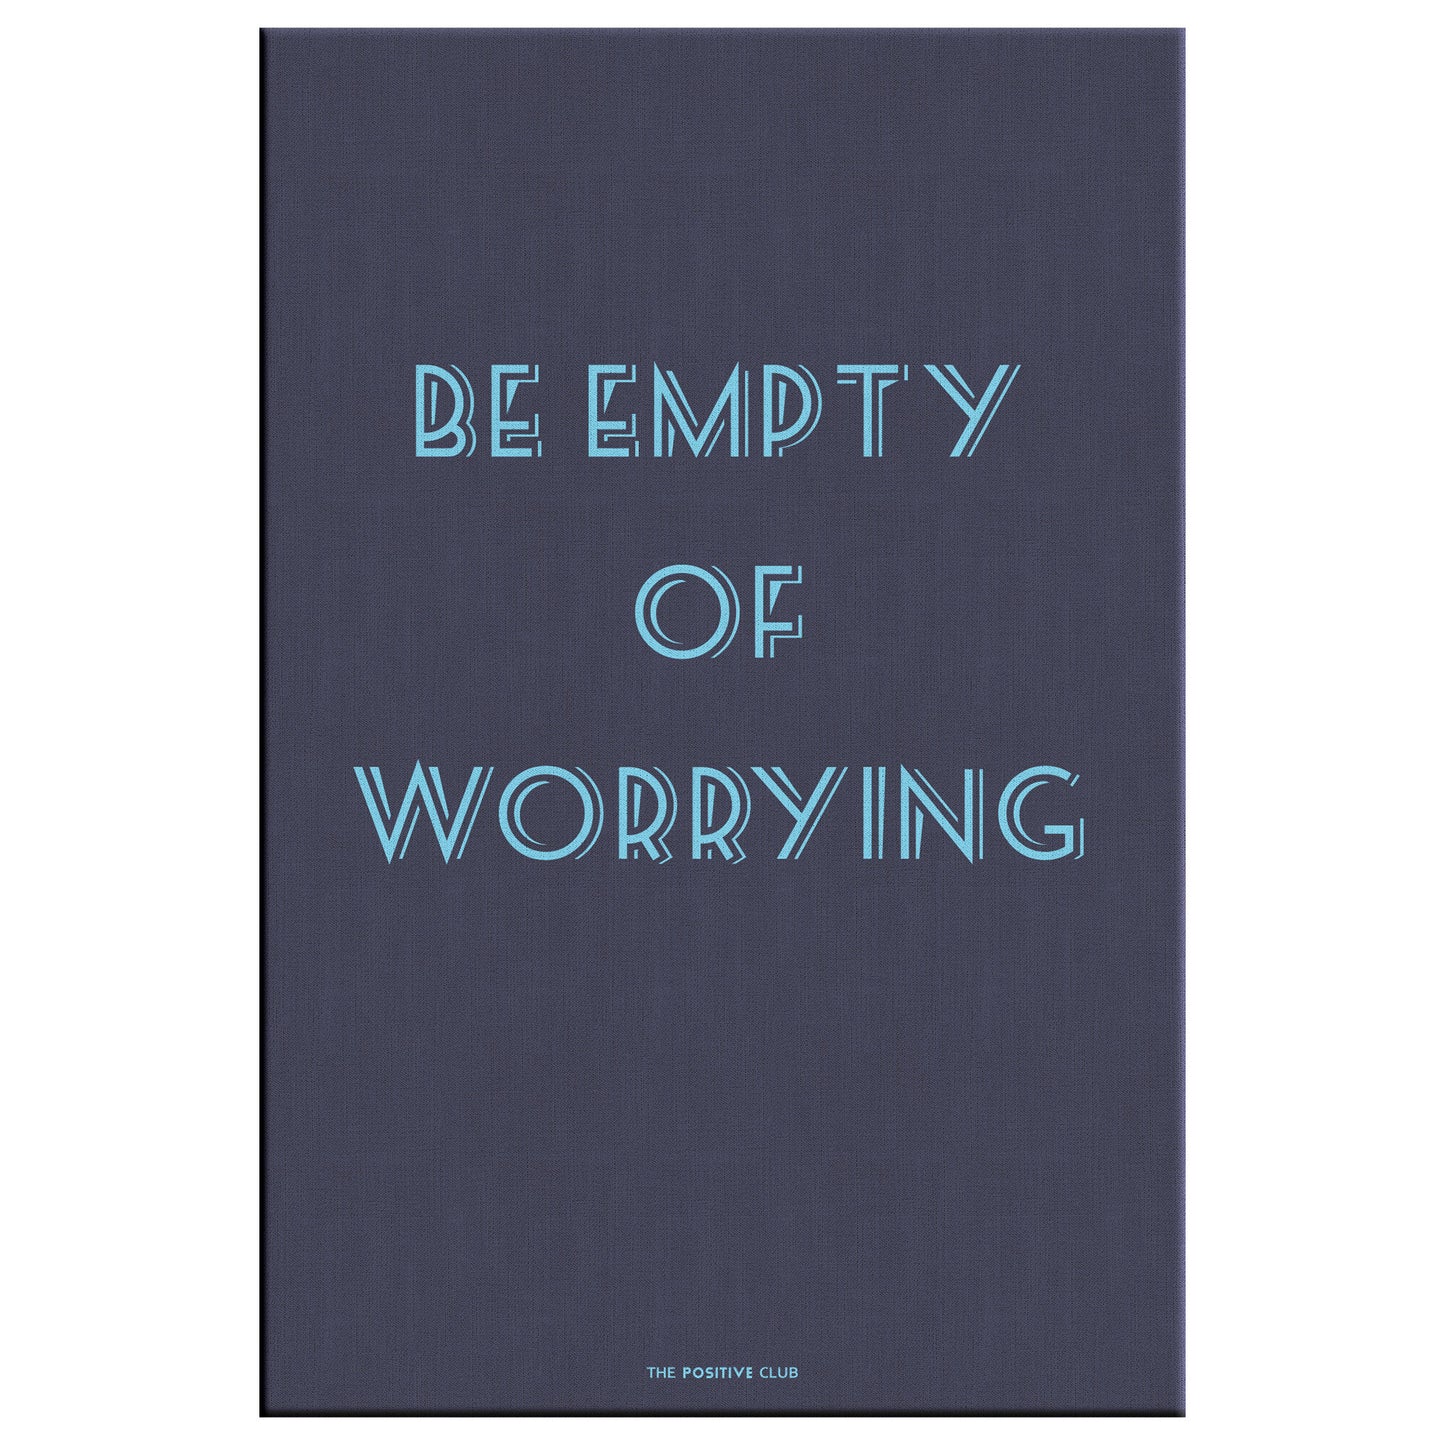 BE EMPTY OF WORRYING